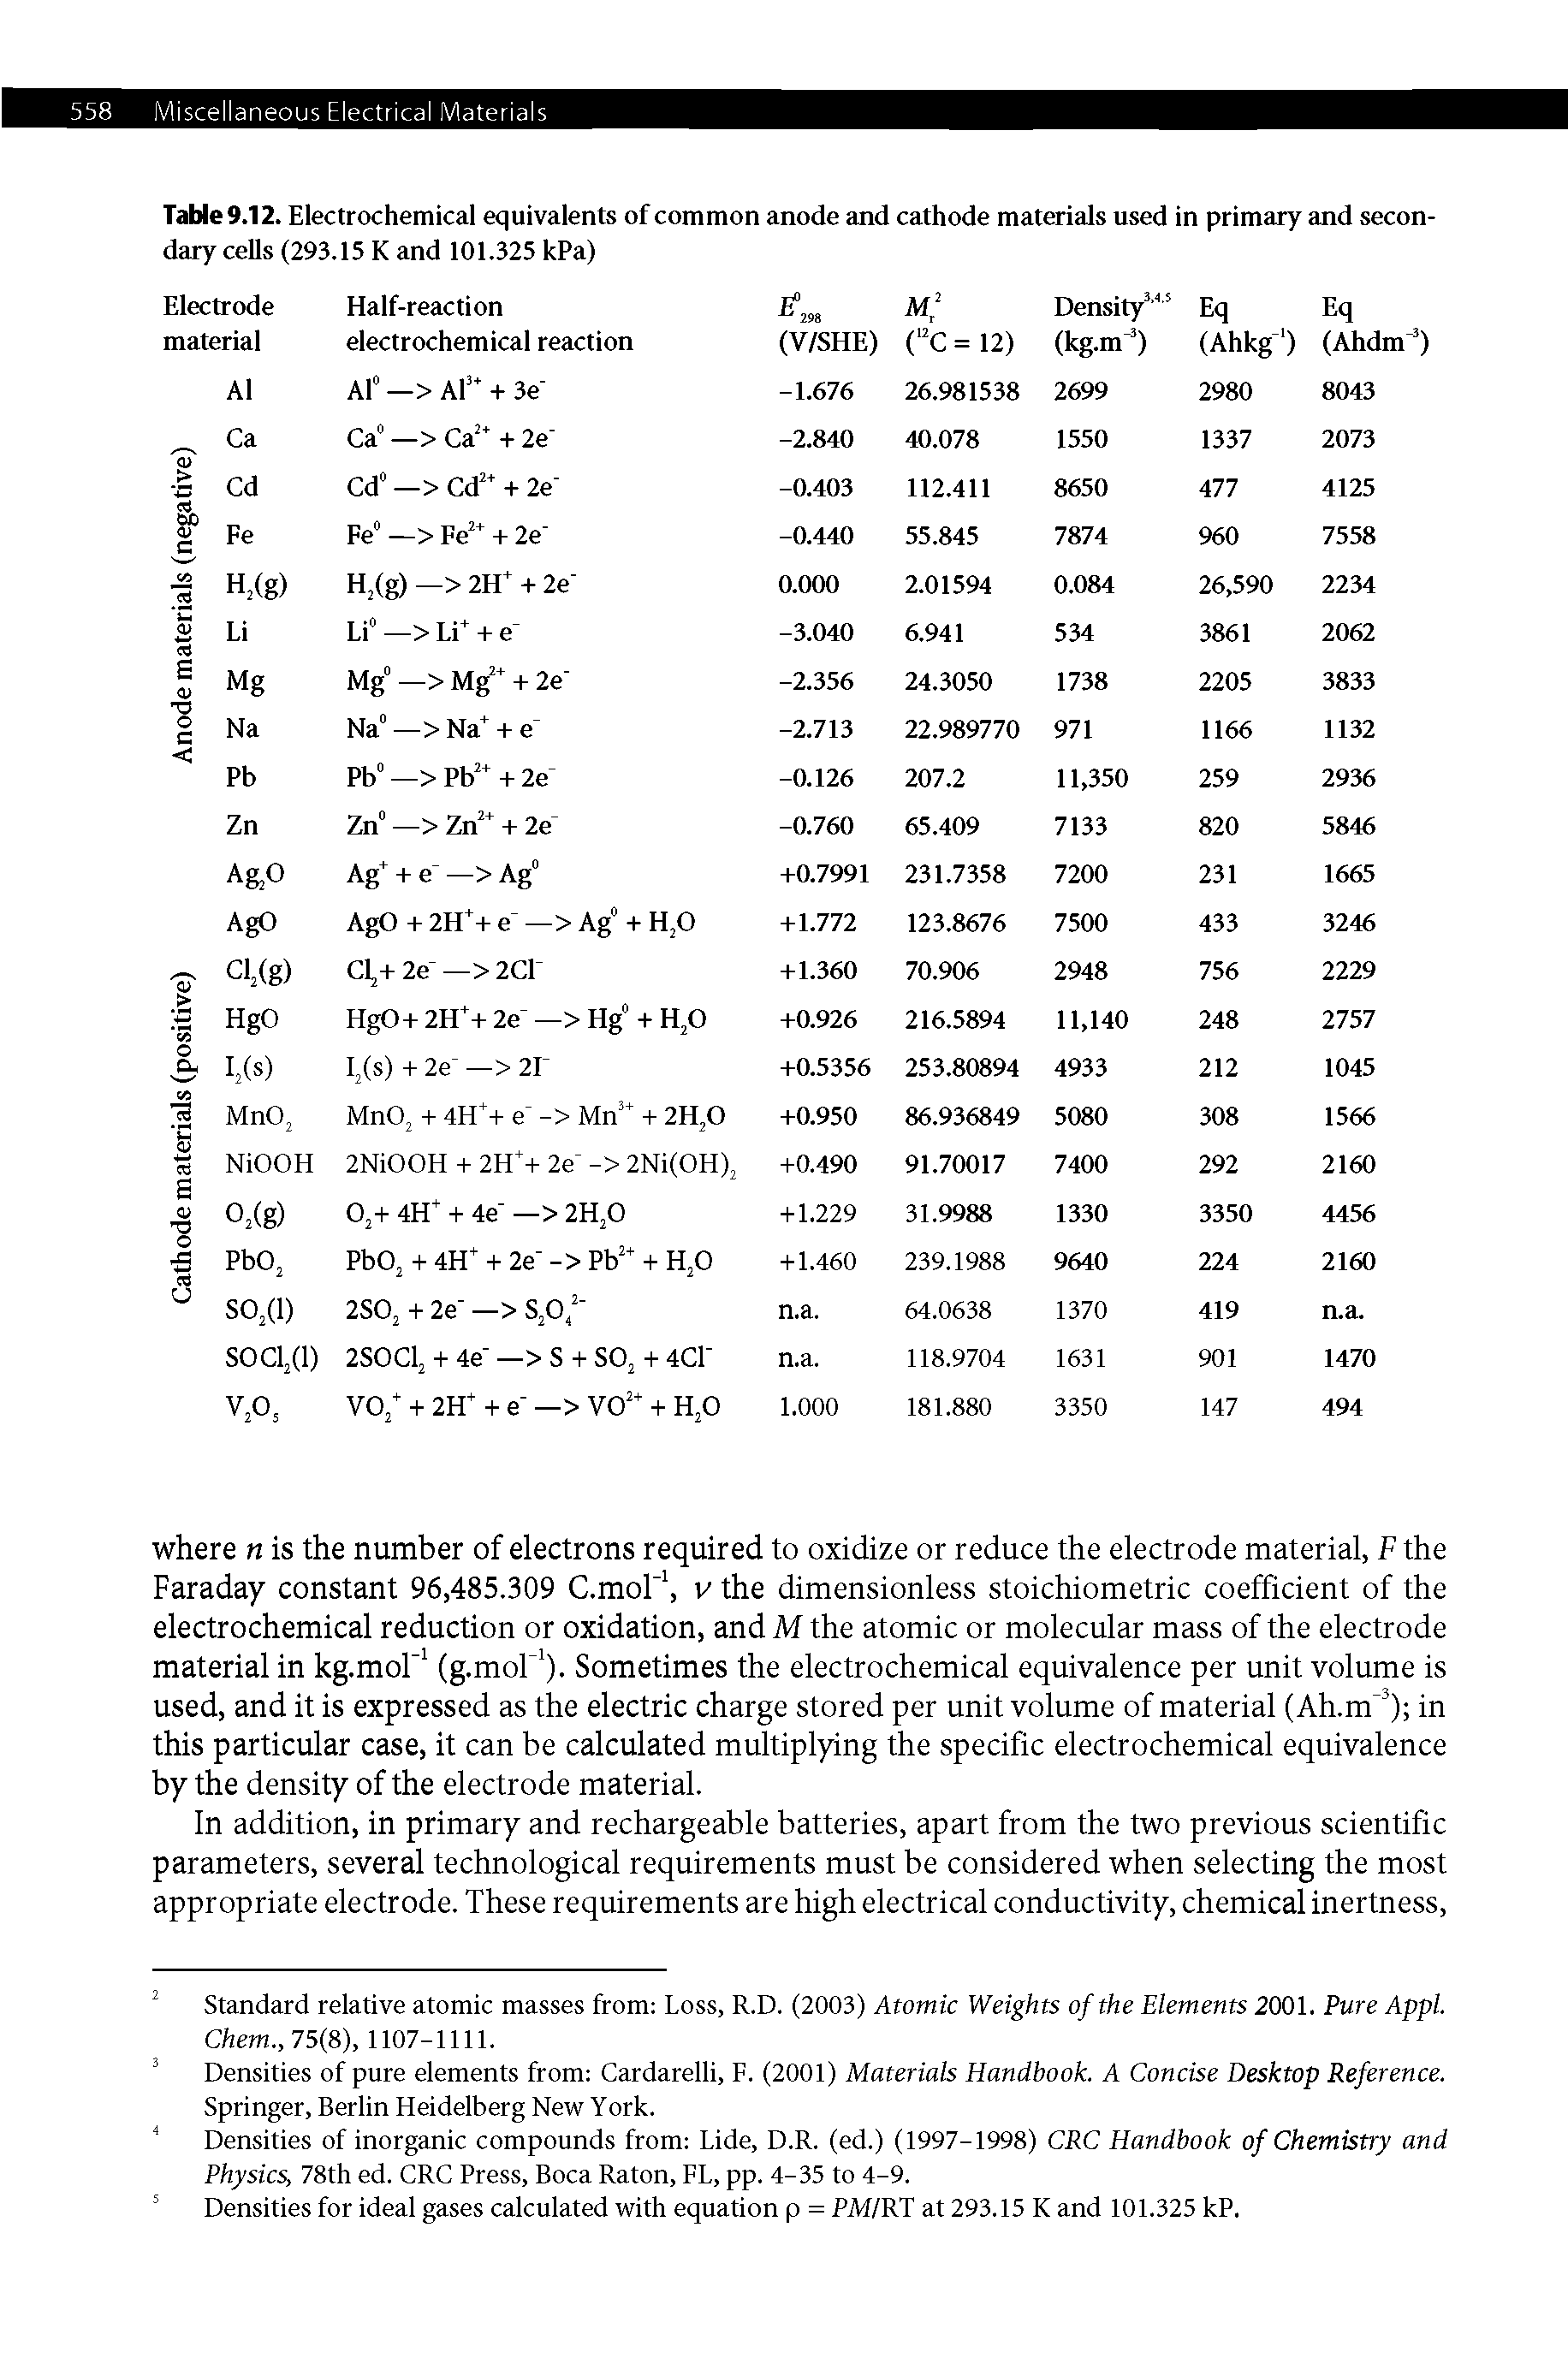 Table9.12. Electrochemical equivalents of common anode and cathode materials used in primary and secondary cells (293.15 K and 101.325 kPa)...